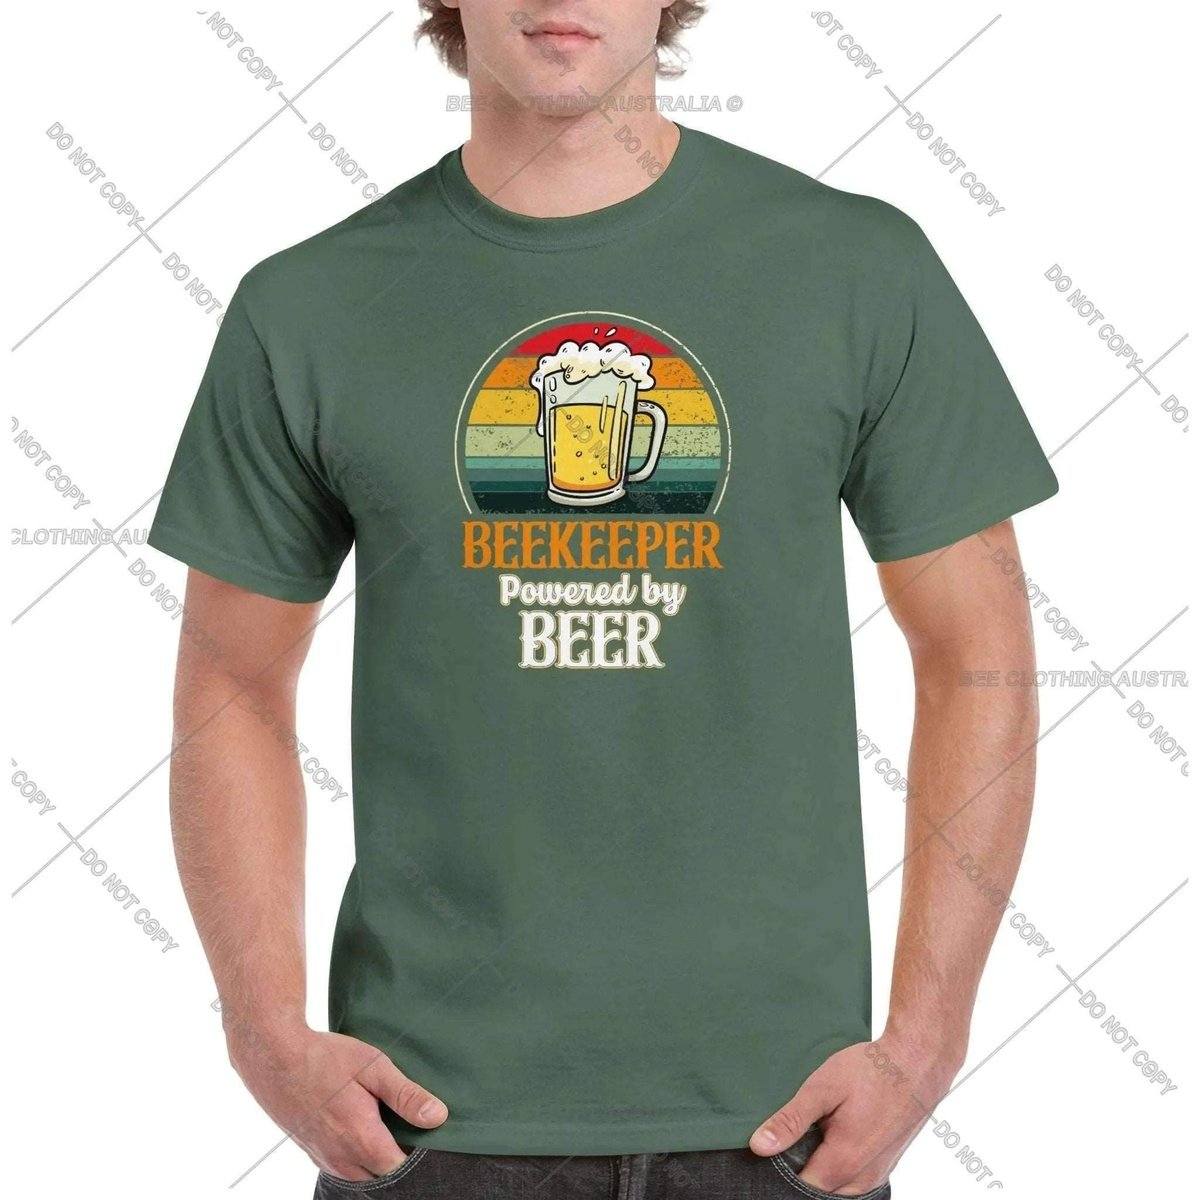 Beekeeper - Powered By Beer Tshirt - Retro Vintage Bee - Unisex Crewneck T-shirt Adults T-Shirts Unisex Military Green / S Bee Clothing Australia